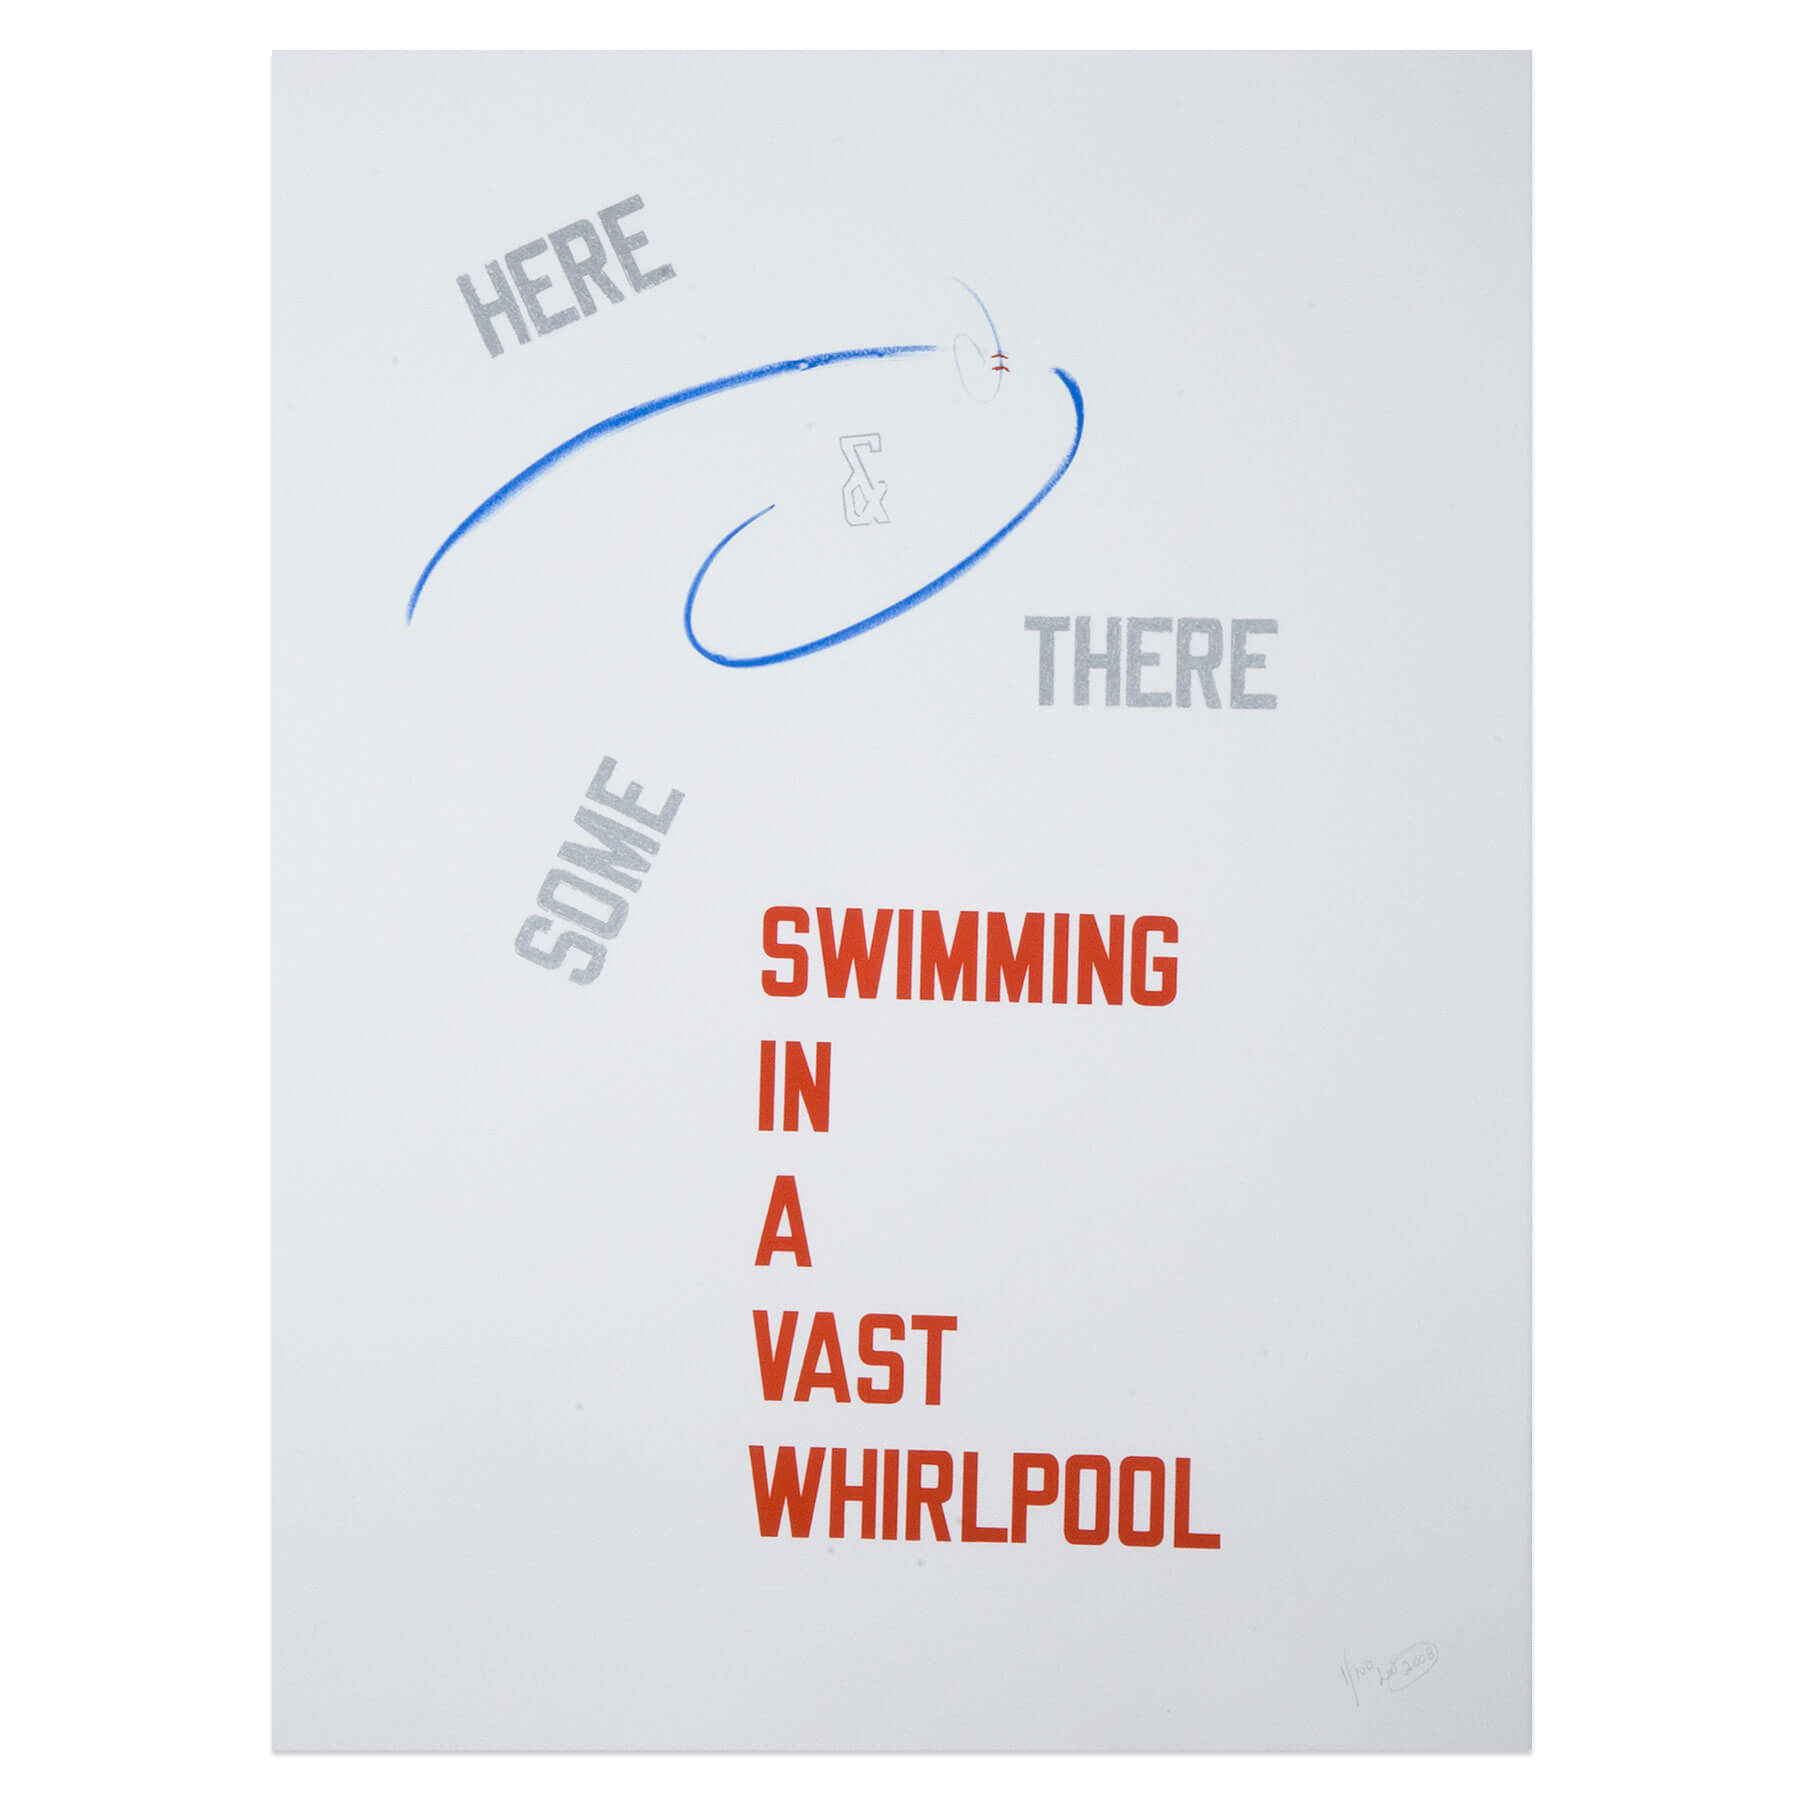 Lawrence Weiner | here & there some swimming in a vast whirlpool